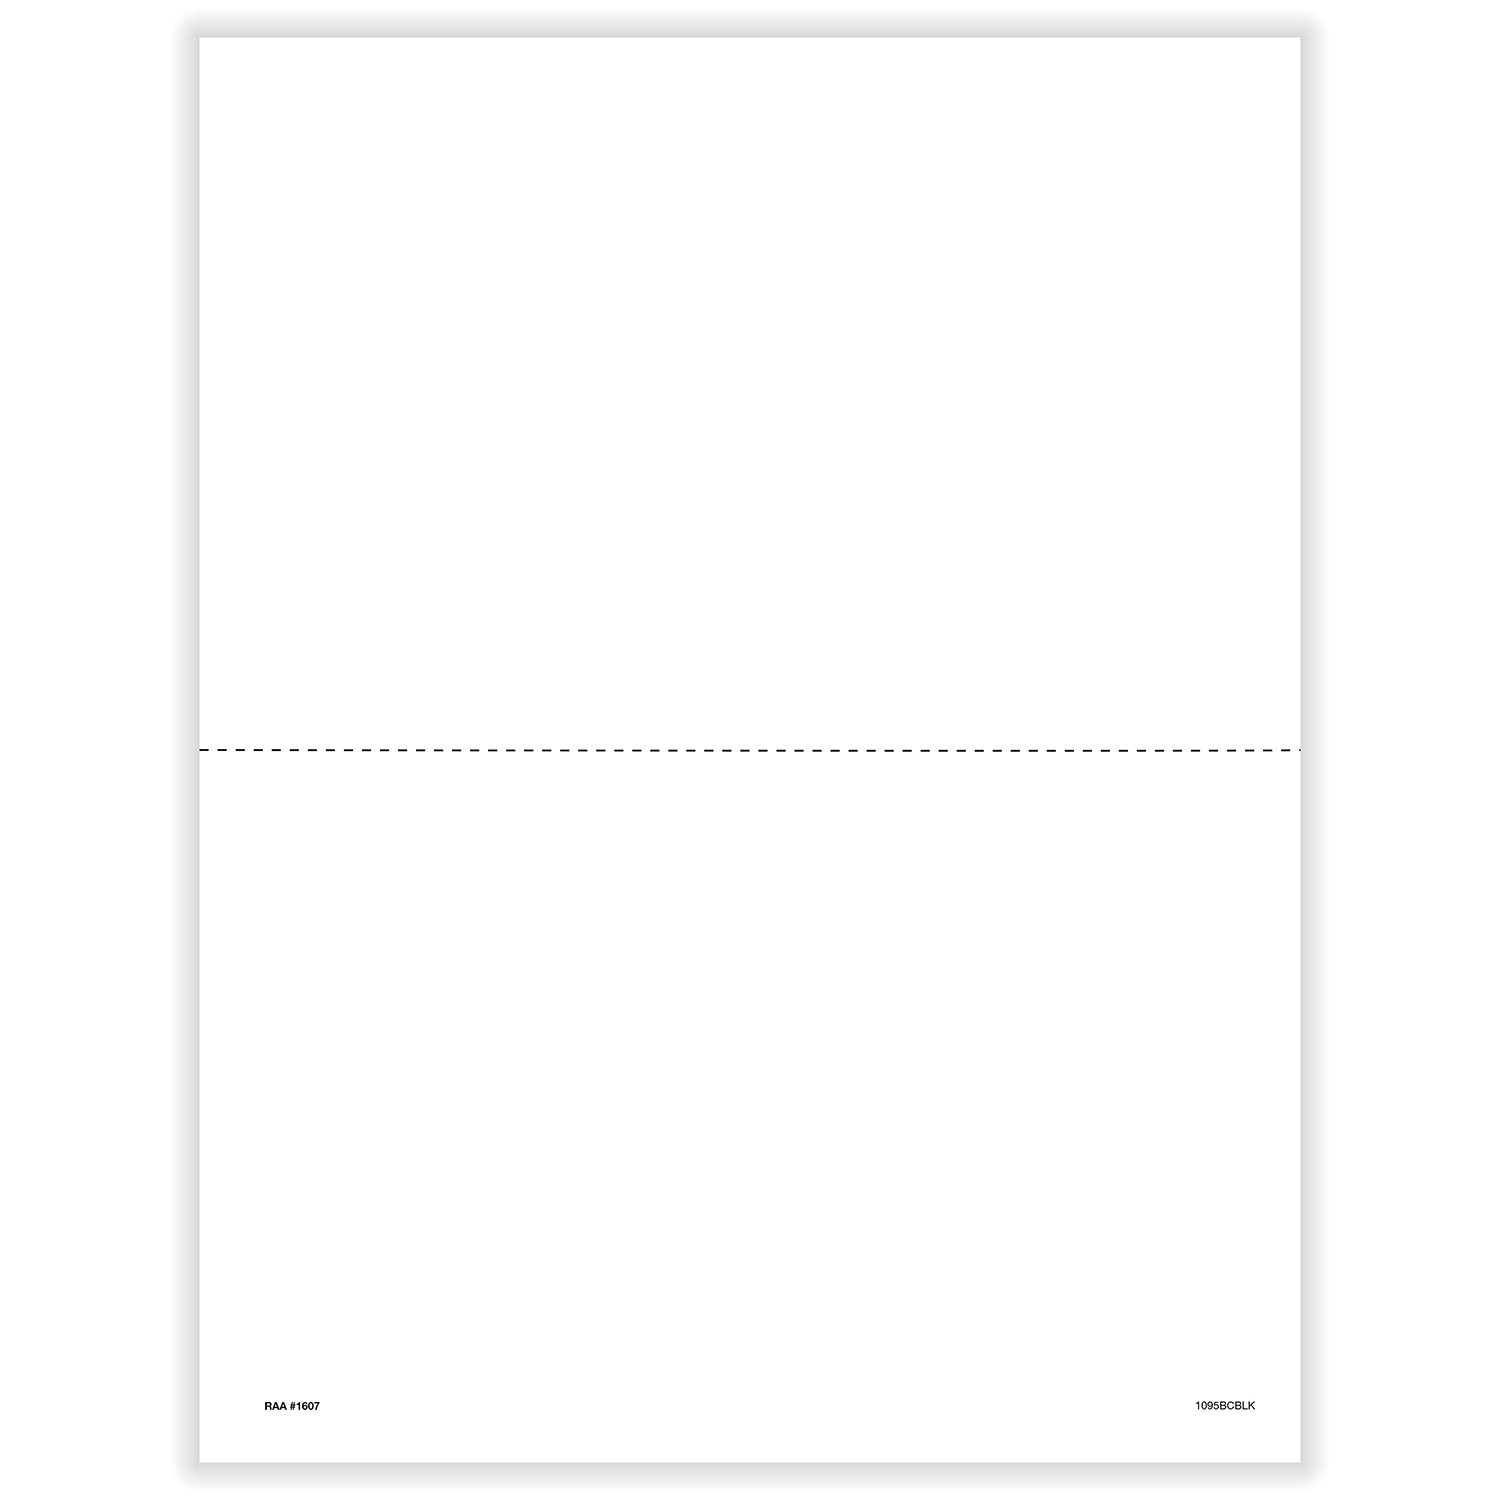 Picture of 1095-B & C Health Coverage Blank w/Backer Instructions